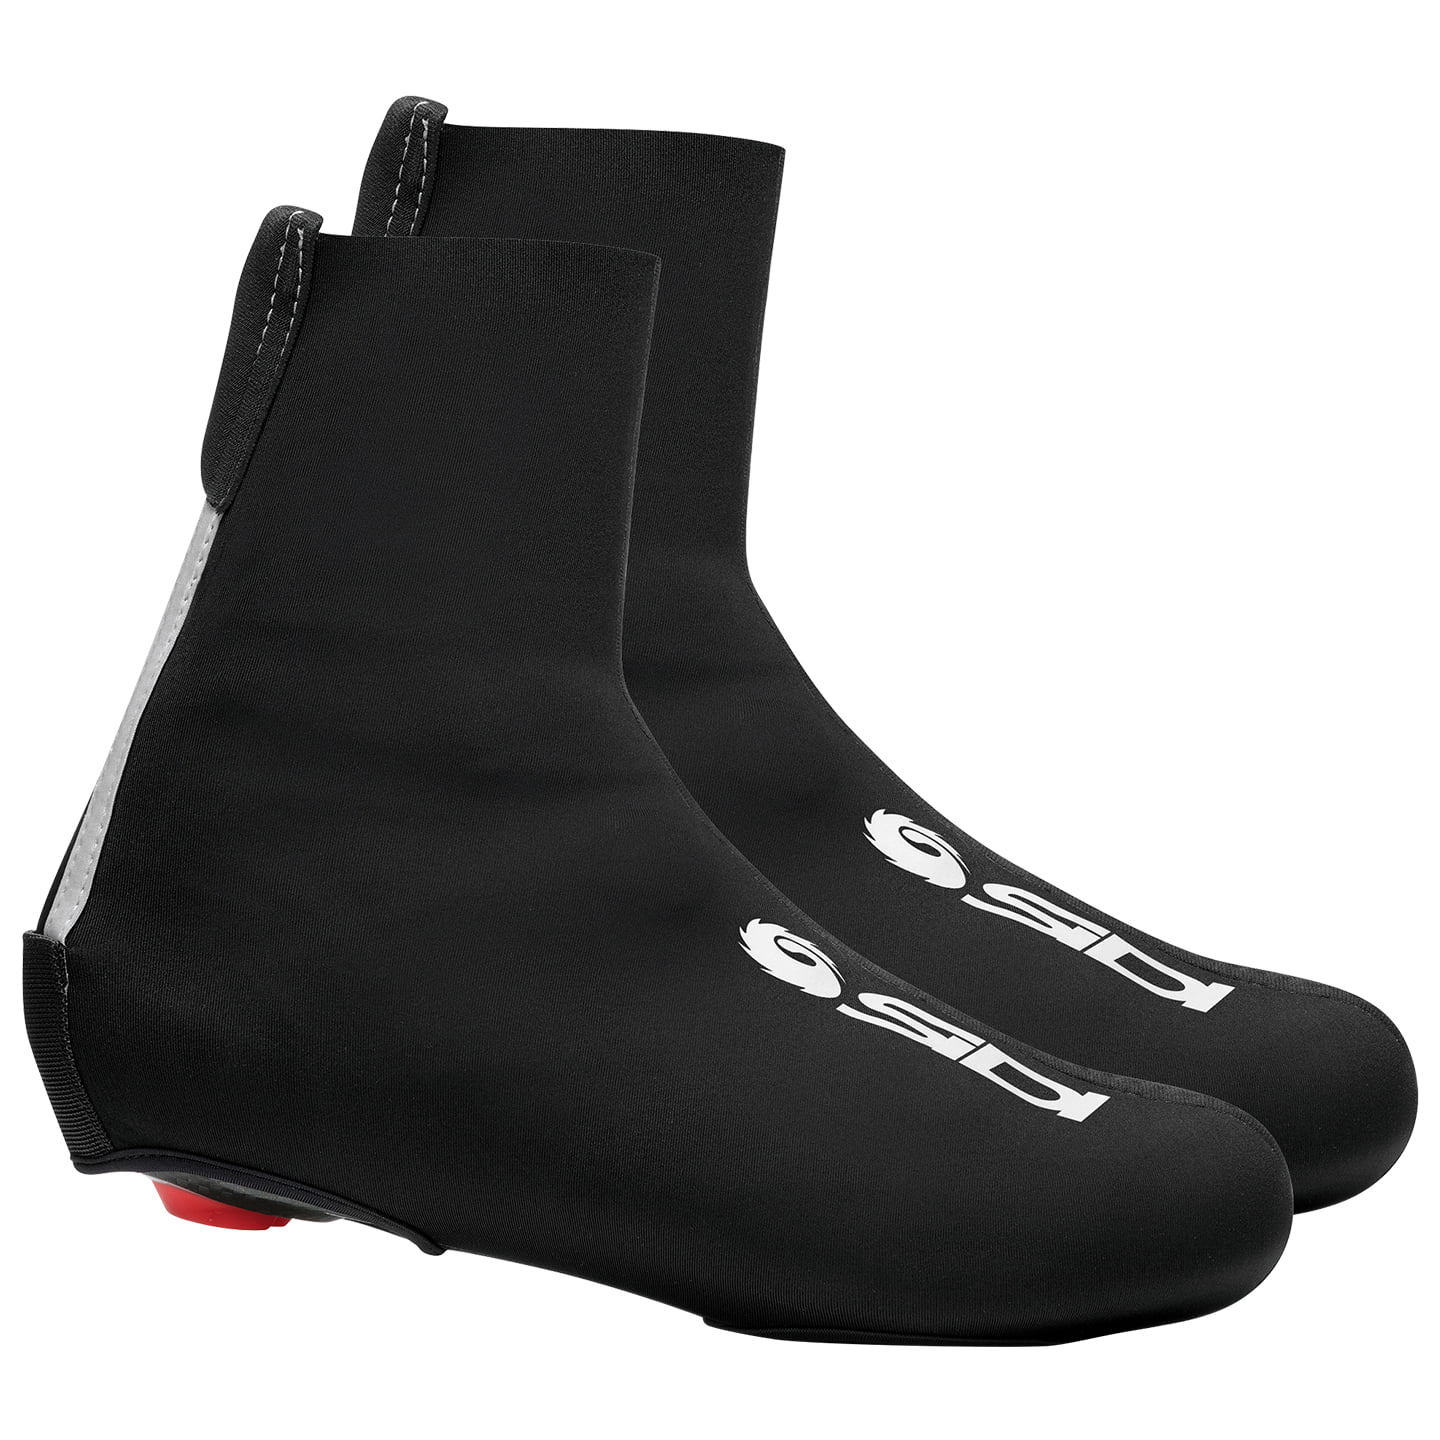 Road Frio Thermal Shoe Covers, Unisex (women / men), size L, Cycling clothing